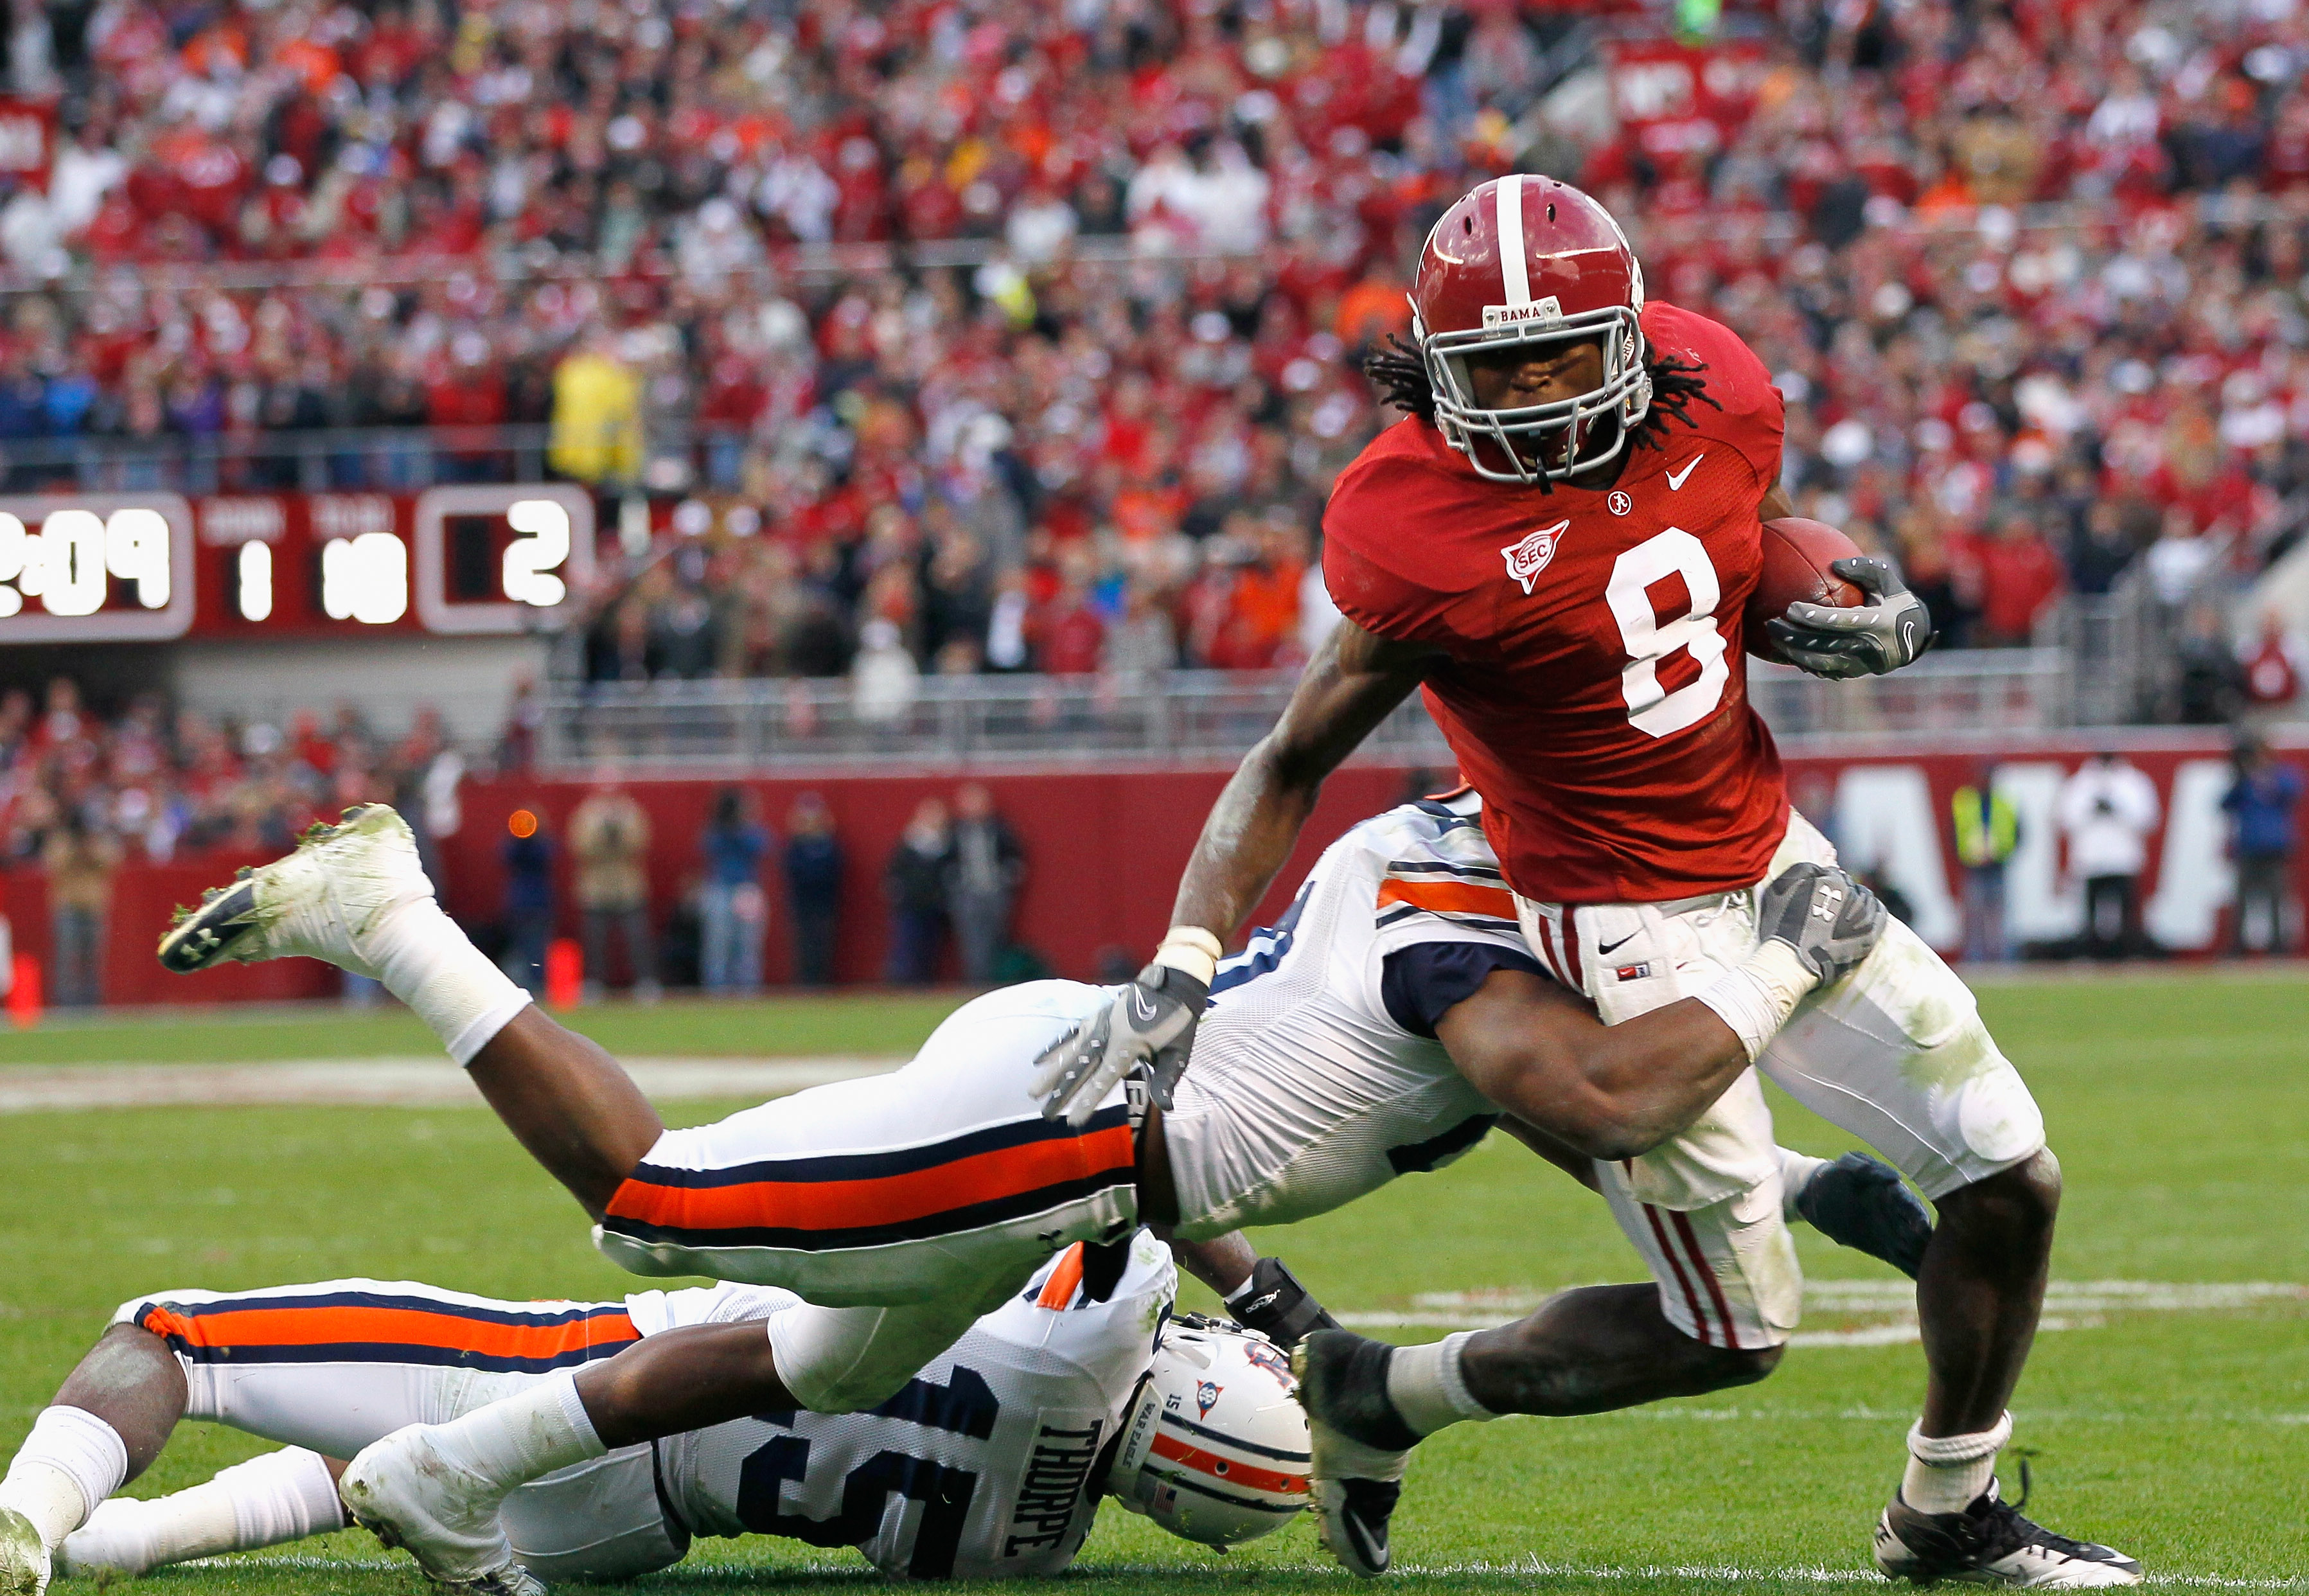 TUSCALOOSA, AL - NOVEMBER 26:  Julio Jones #8 of the Alabama Crimson Tide is tackled by Neiko Thorpe #15 and Eltoro Freeman #21 of the Auburn Tigers at Bryant-Denny Stadium on November 26, 2010 in Tuscaloosa, Alabama.  (Photo by Kevin C. Cox/Getty Images)